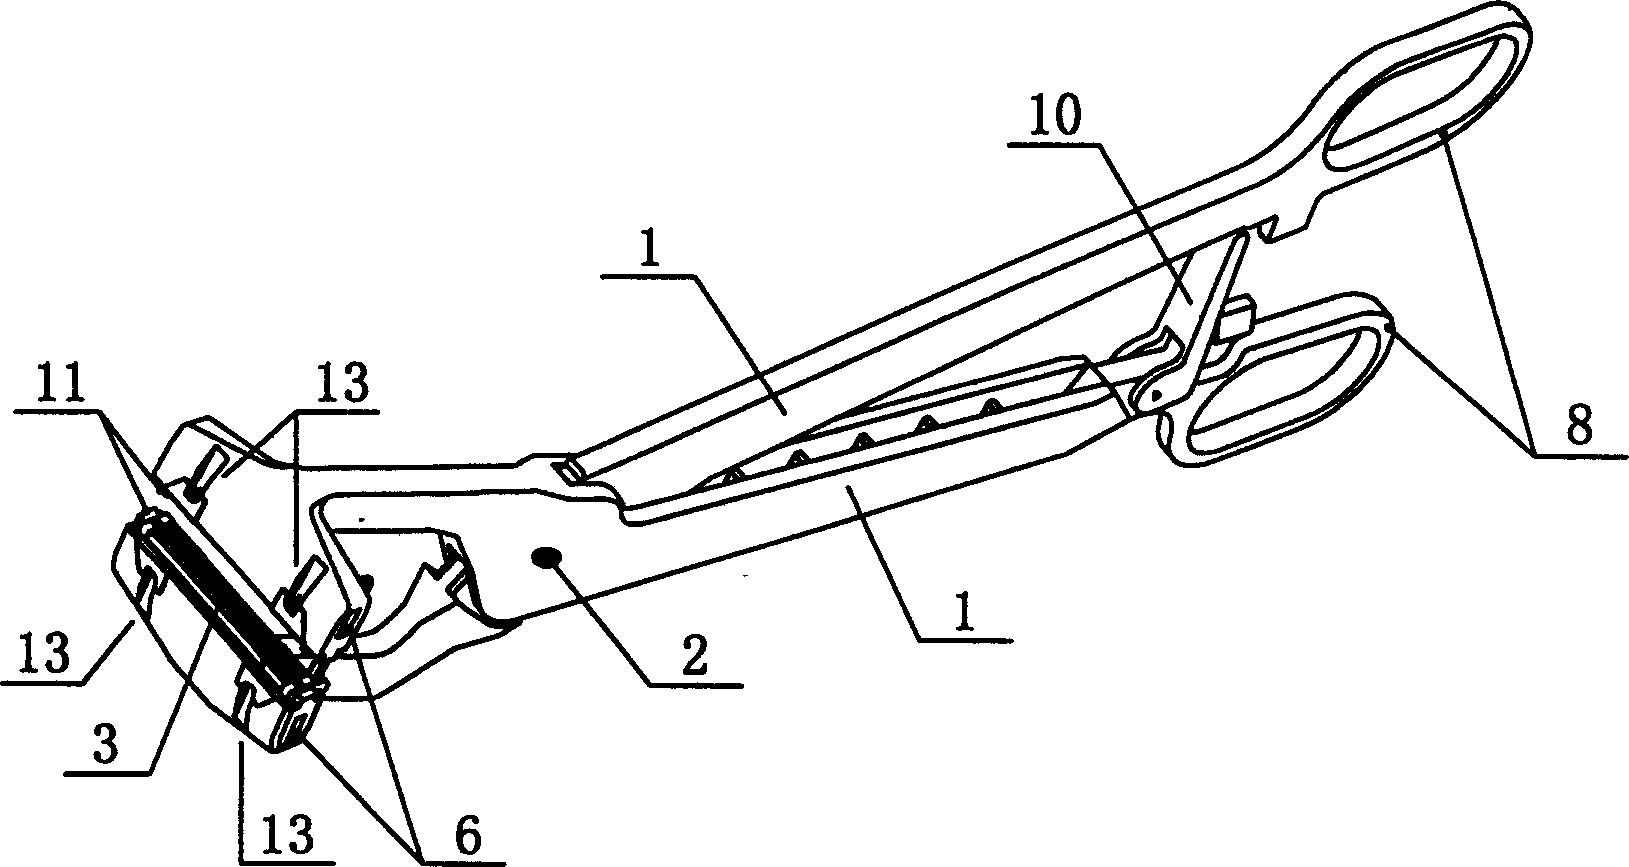 Purse-string suturing device